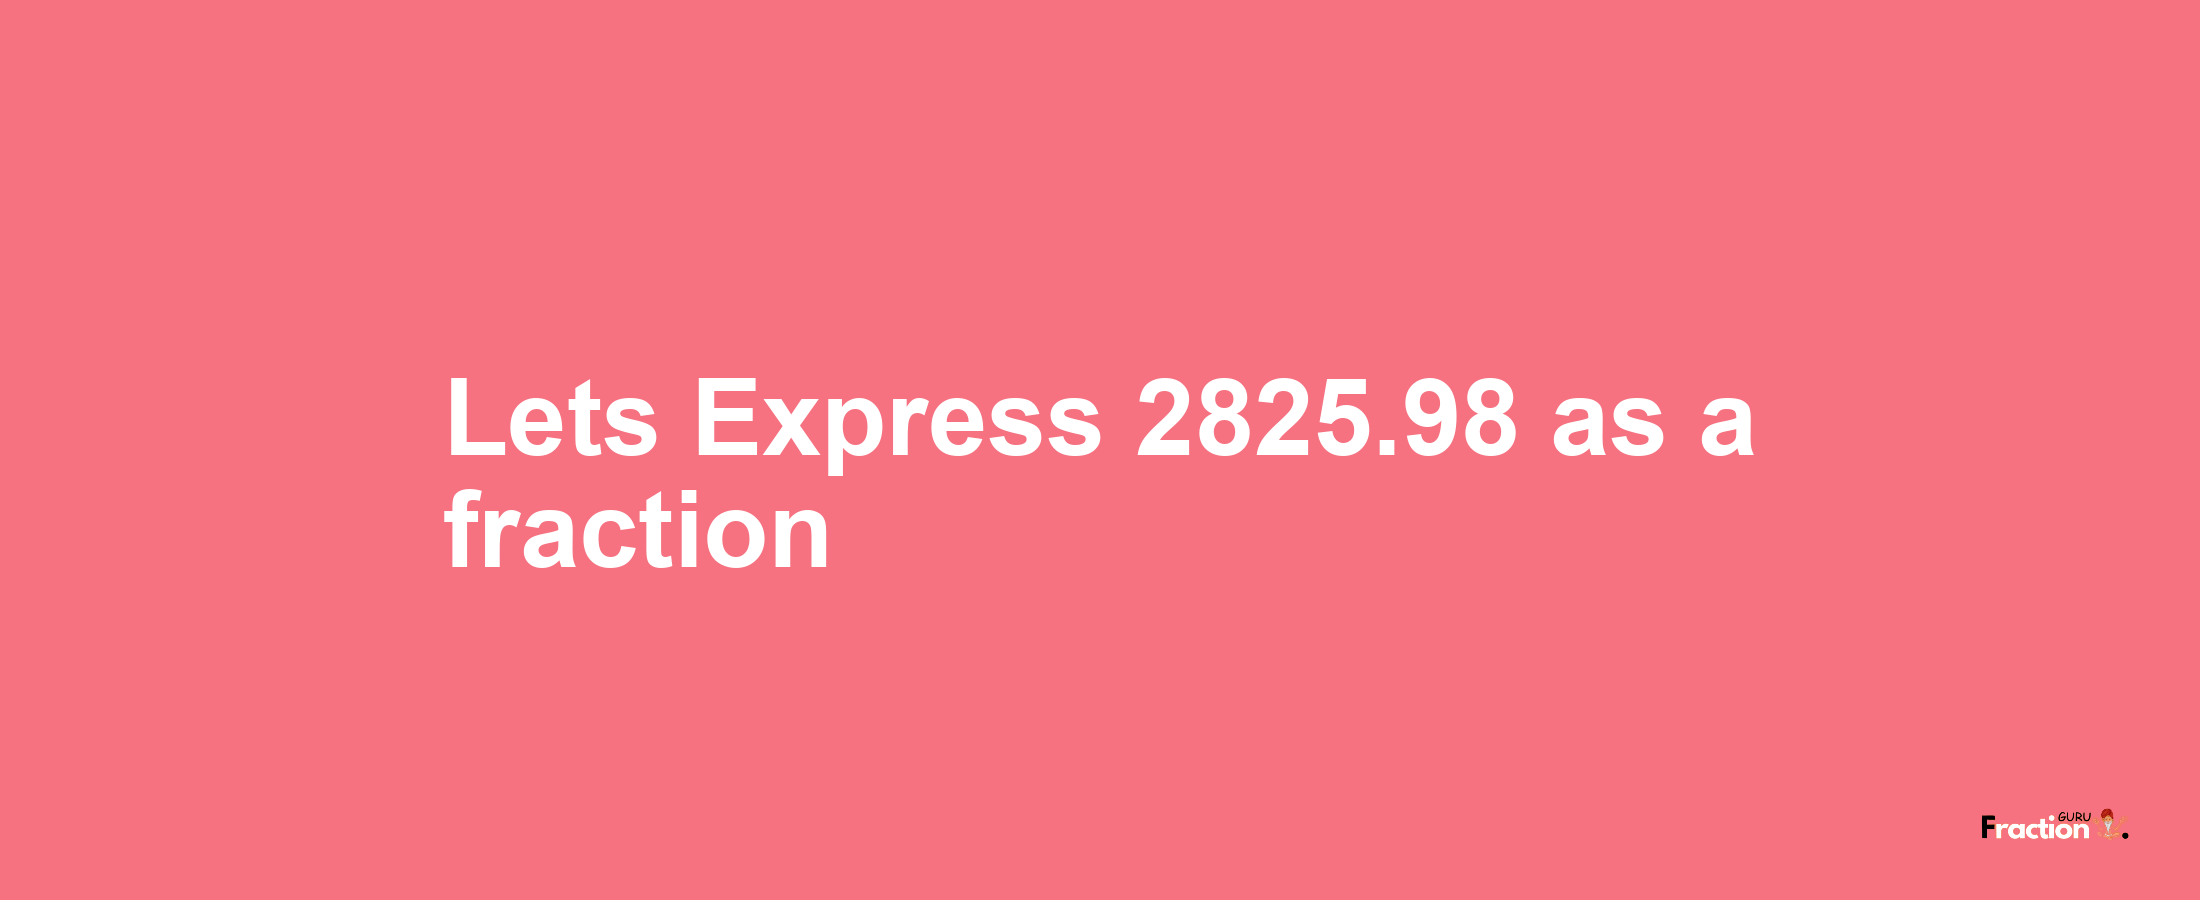 Lets Express 2825.98 as afraction